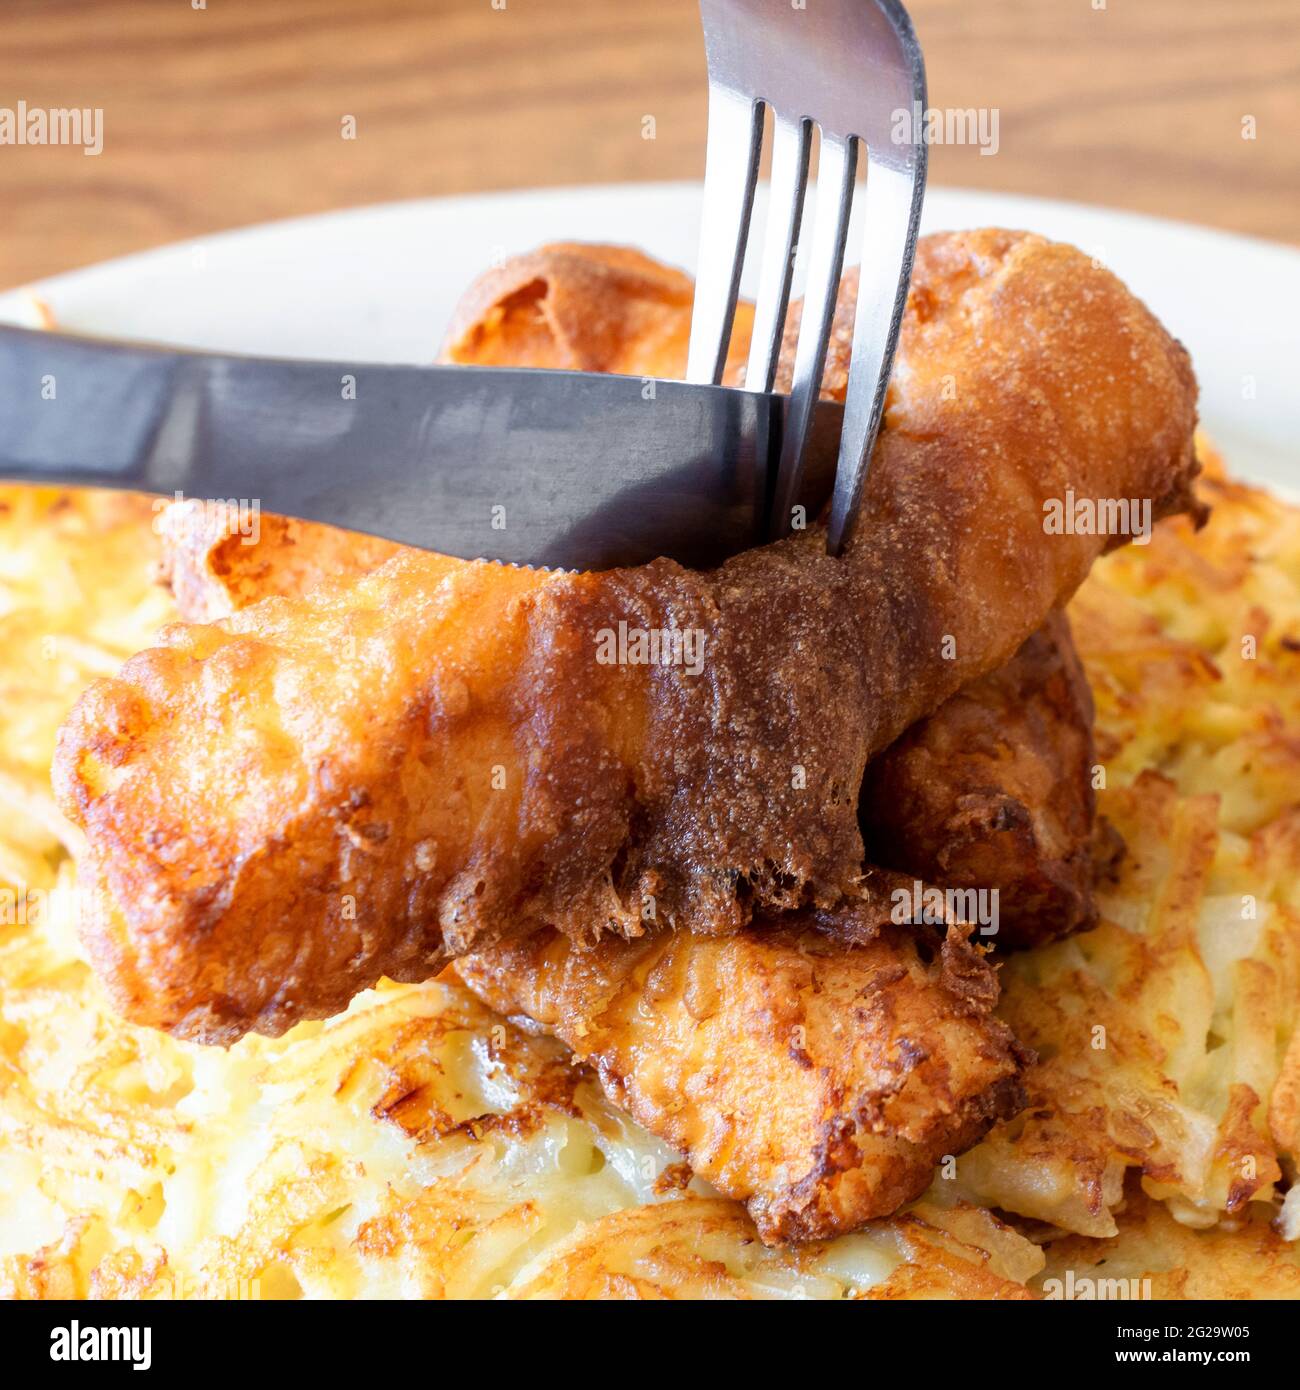 Deep fried fish is being cut into while on a bed of hashbrowns on a white plate. Stock Photo